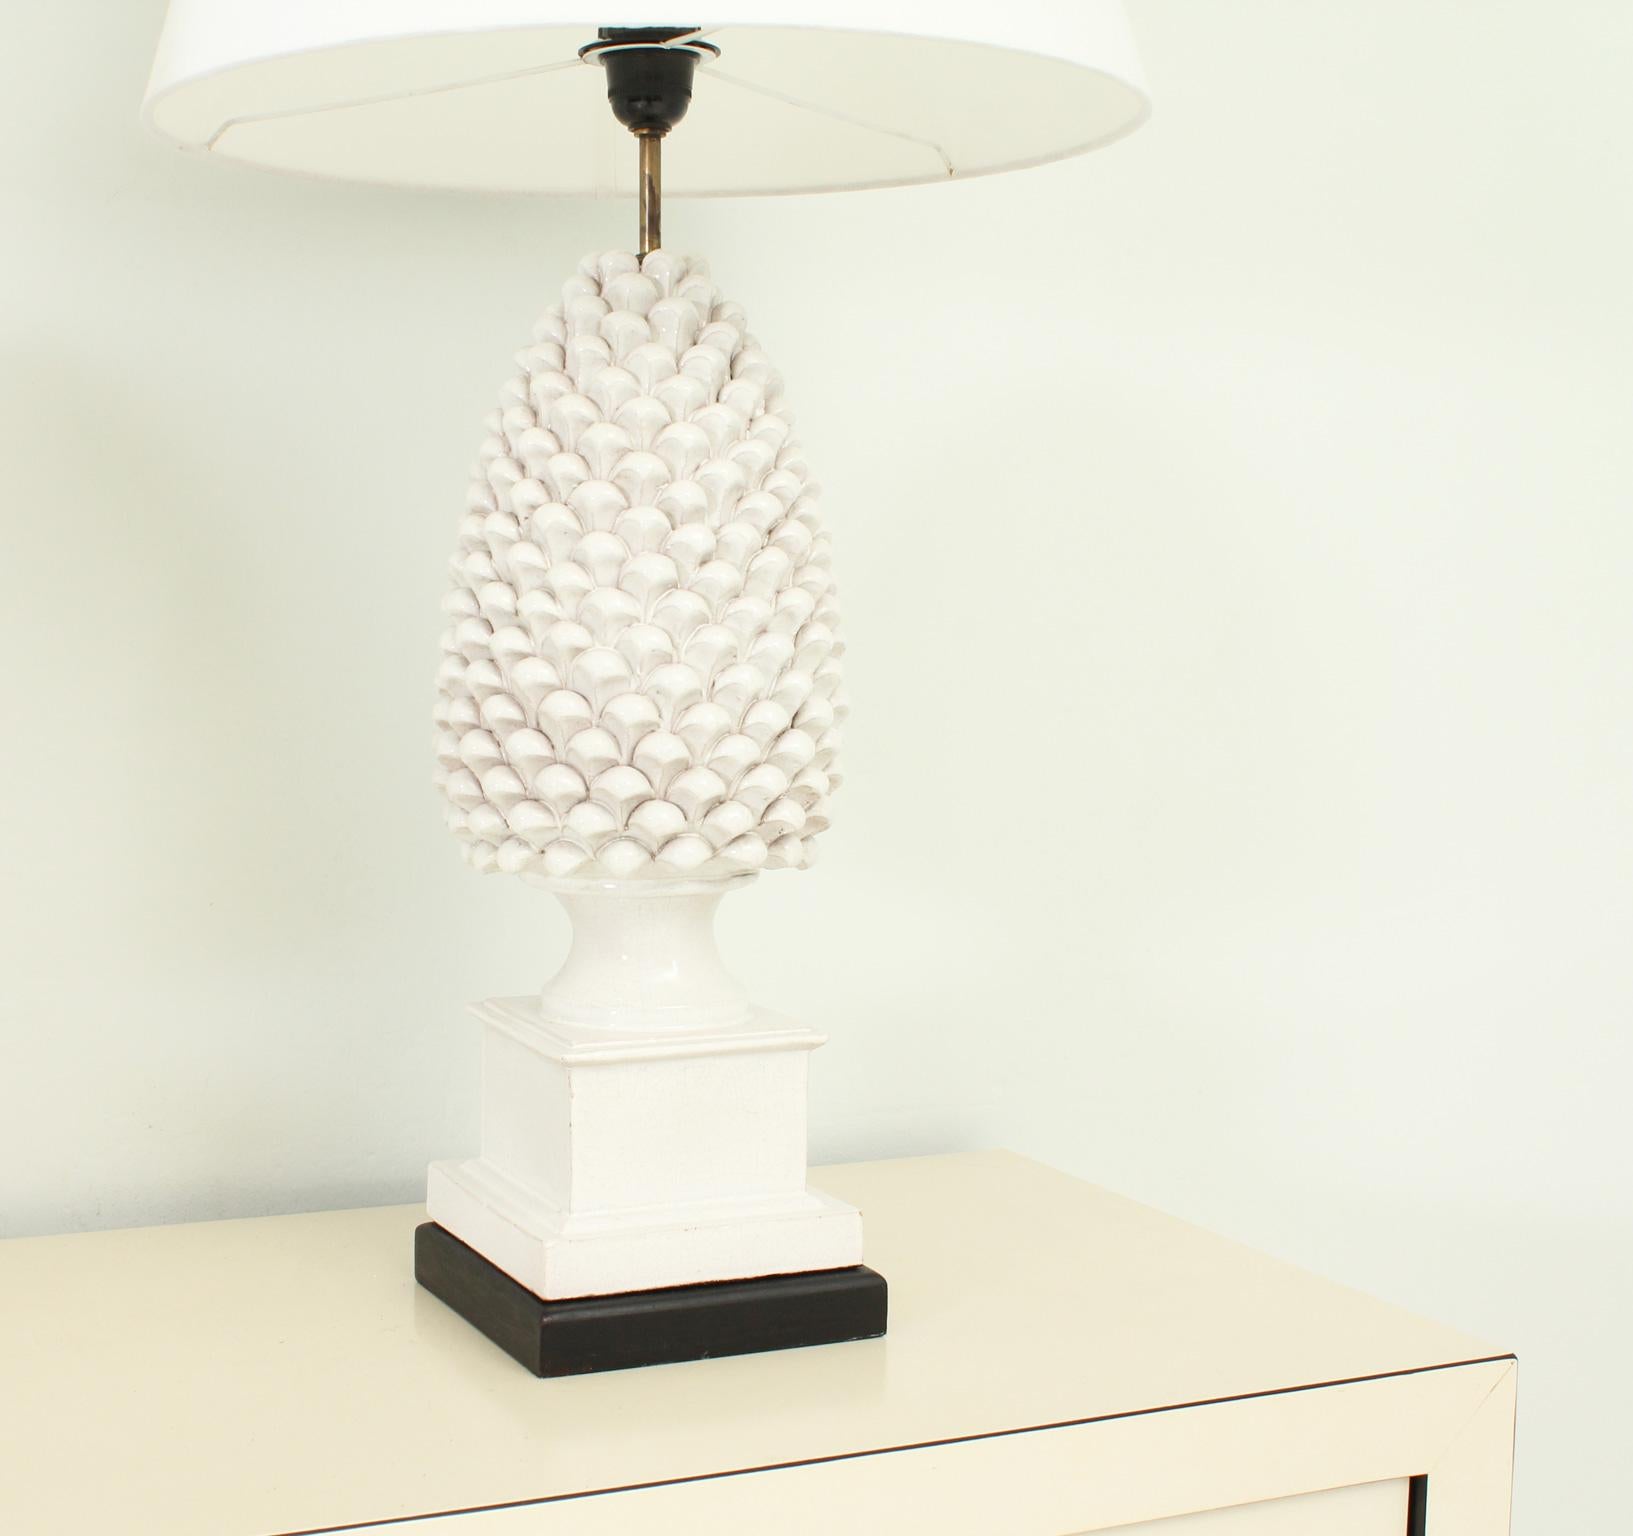 Spanish Pair of Pineapple Ceramic Table Lamps by Antonio Campuzano, Spain, 1960's For Sale